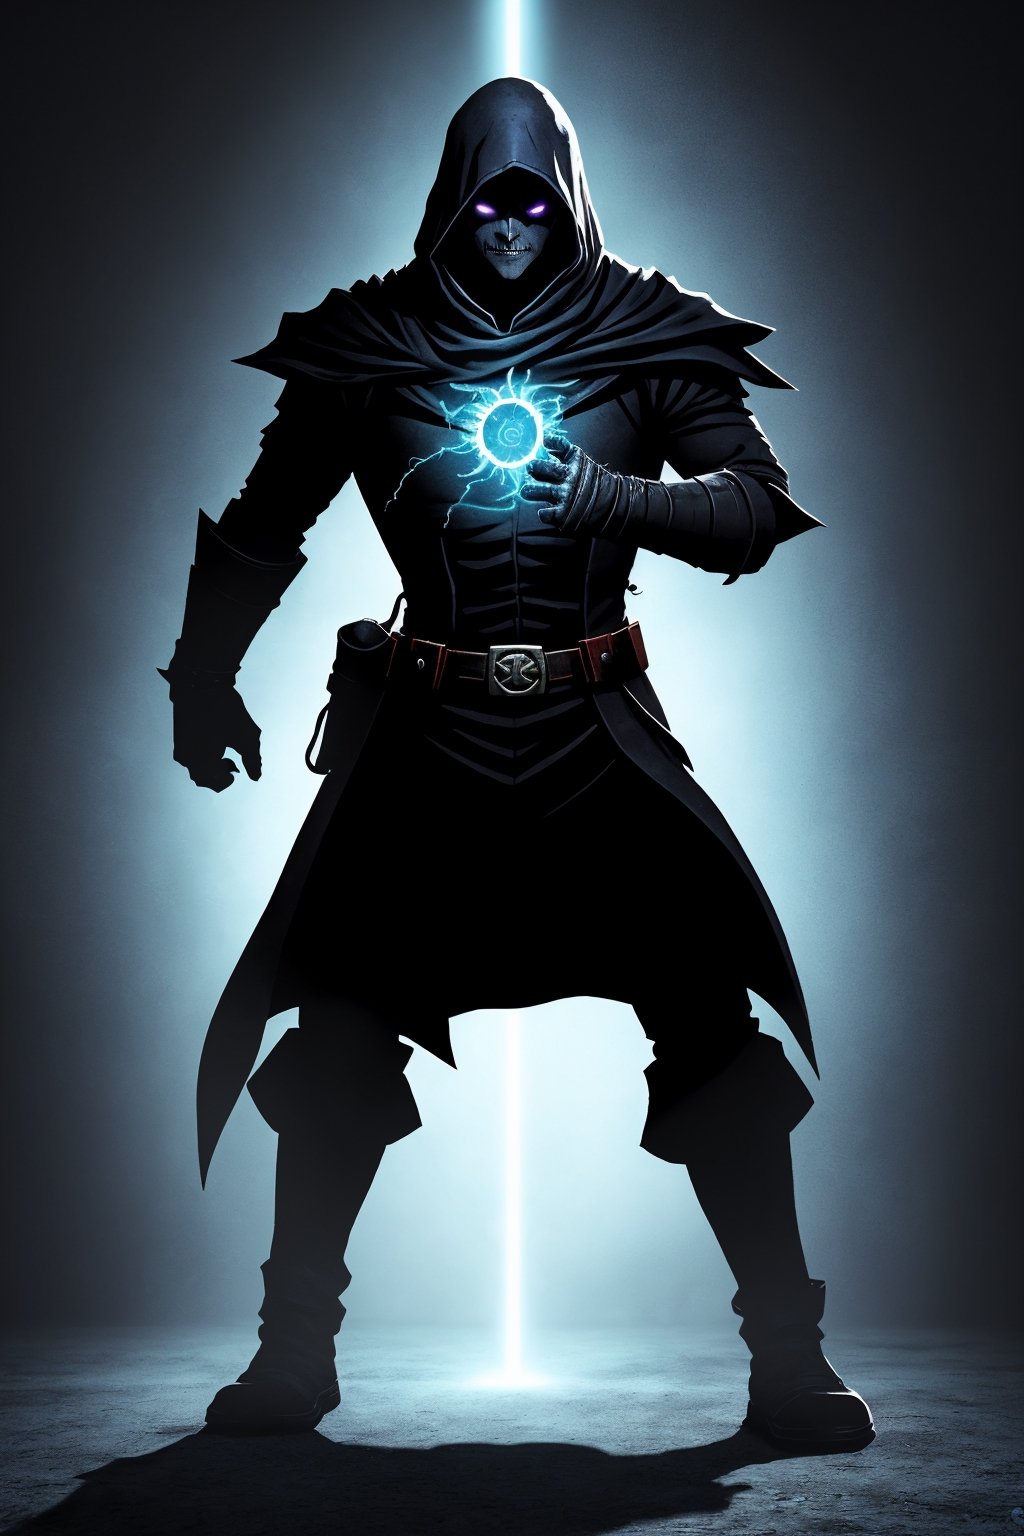 Shadowbound Rogue:

Background: A rogue who made a pact with a shadowy entity. They walk the line between light and darkness, gaining powers at the cost of an ever-present connection to the shadows.
Abilities: Shadow manipulation, stealth enhancement, and the power to slip into the shadows for short-range teleportation